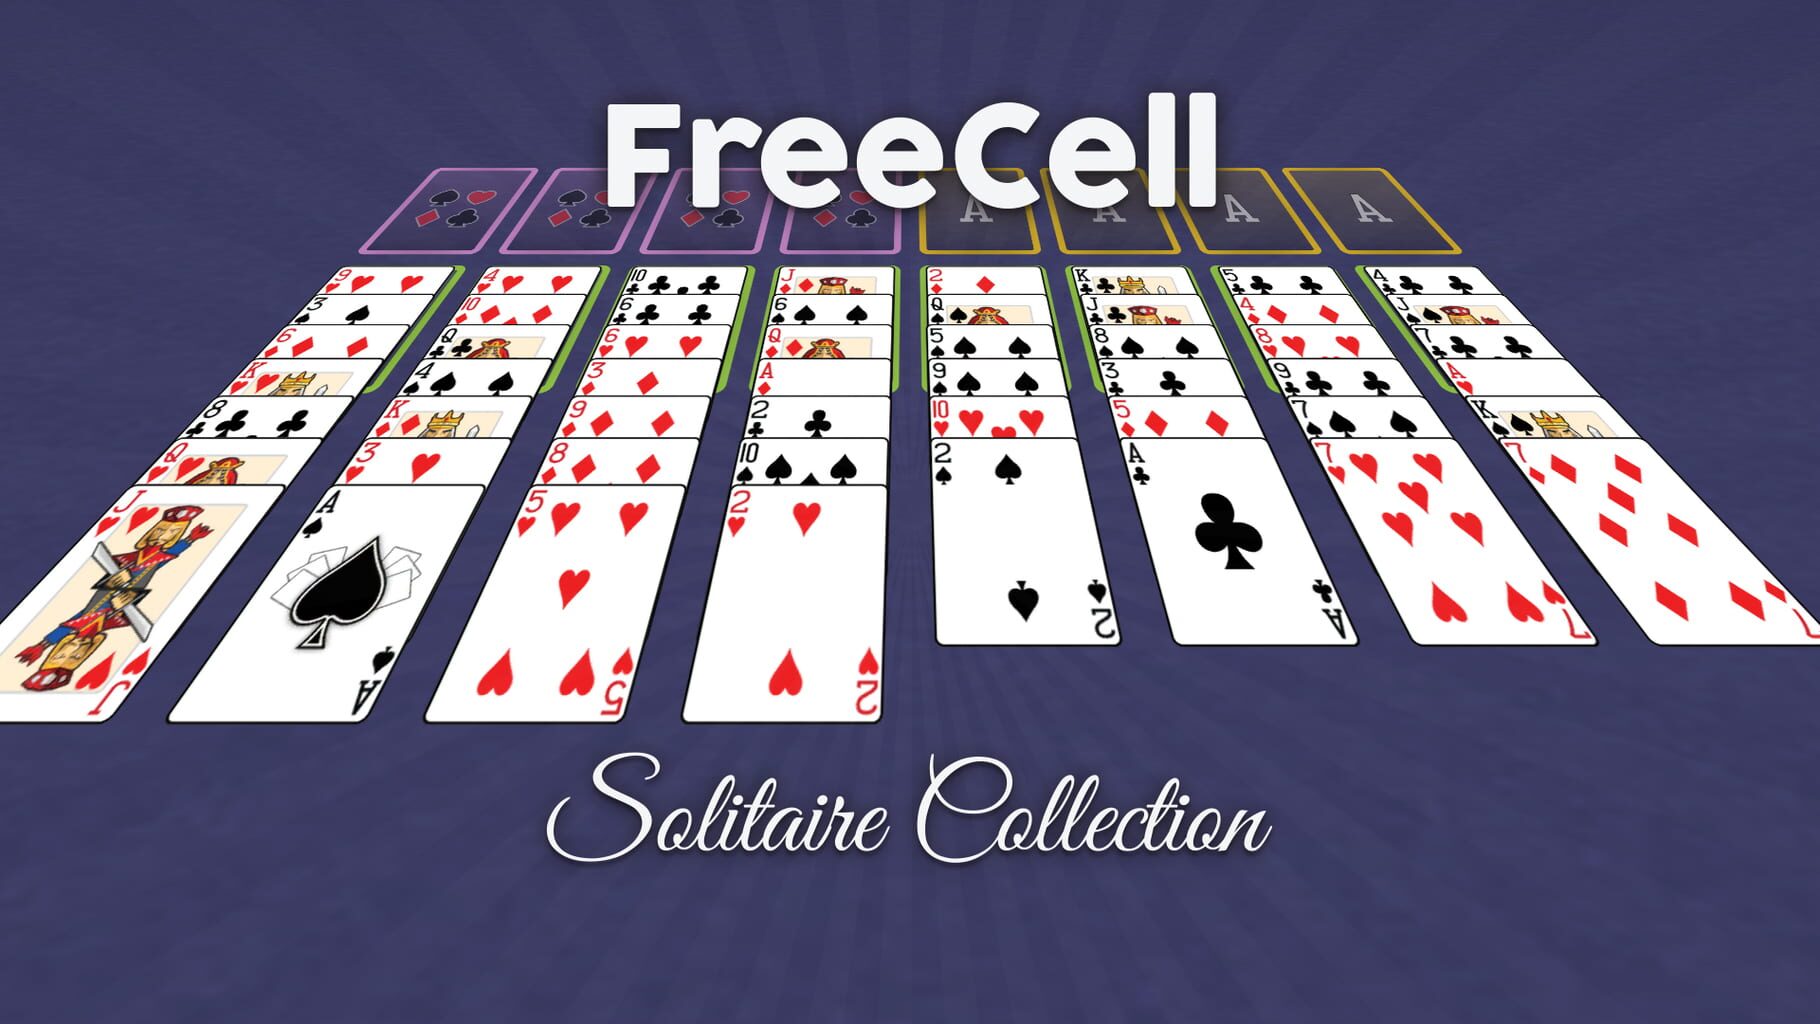 FreeCell Solitaire Collection artwork